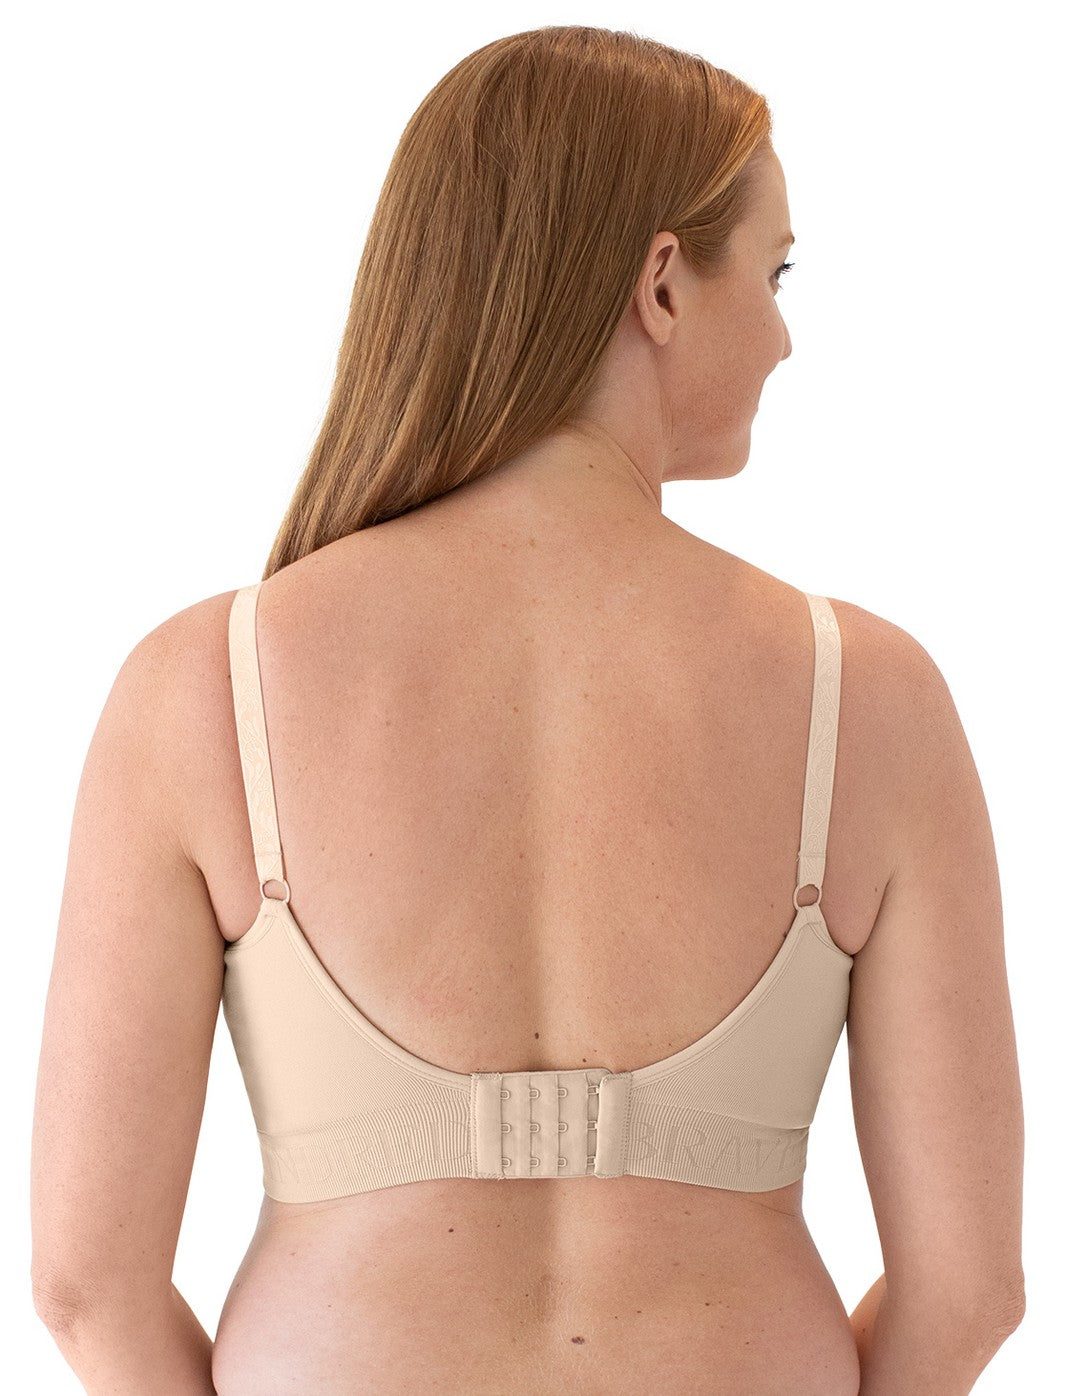 Kindred Bravely Sublime Hands Free Pumping Bra  Patented All-in-One Pumping  & Nursing Bra with EasyClip